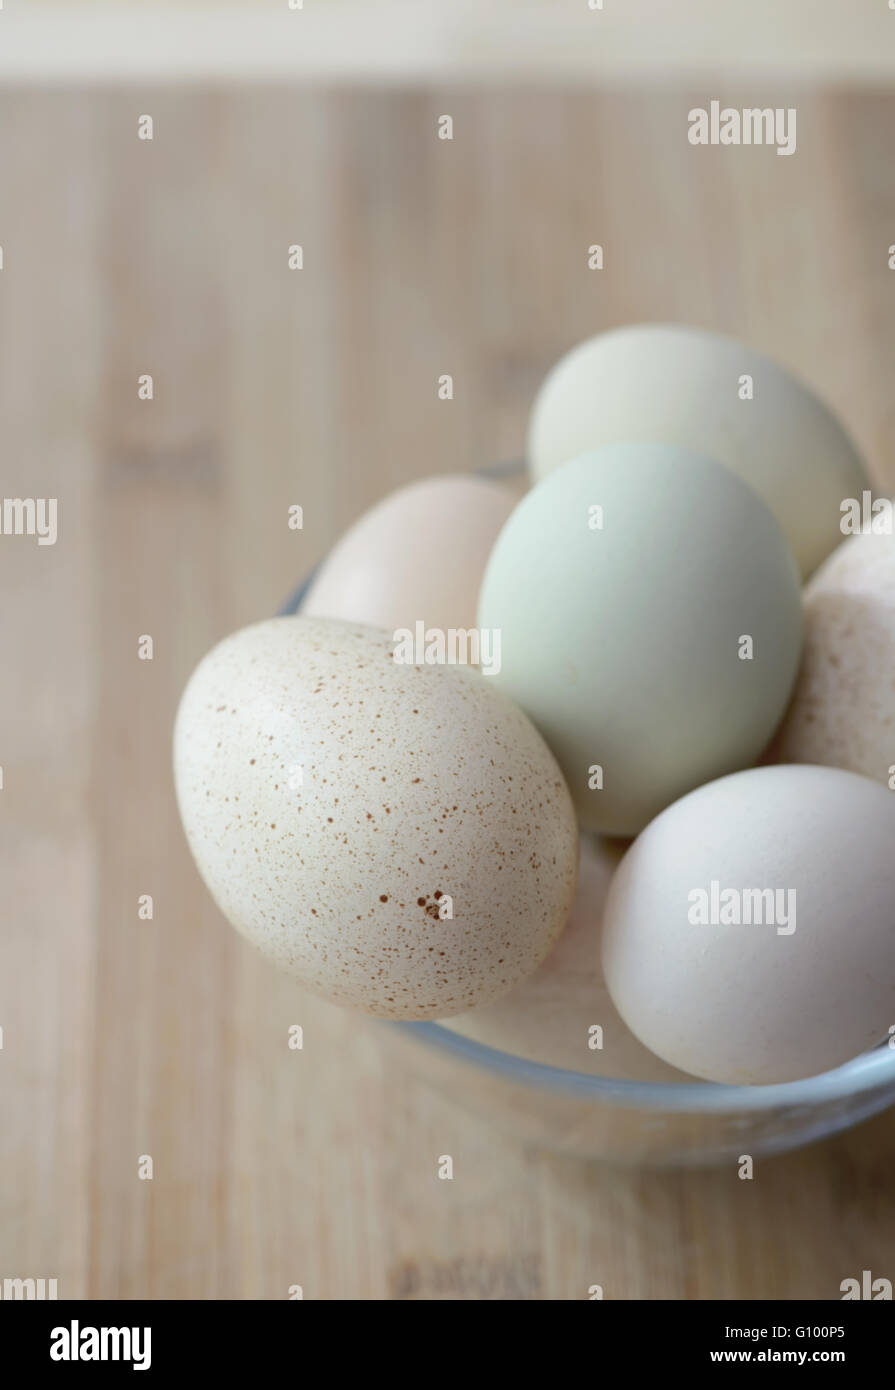 Eggs in different colors and sizes Stock Photo